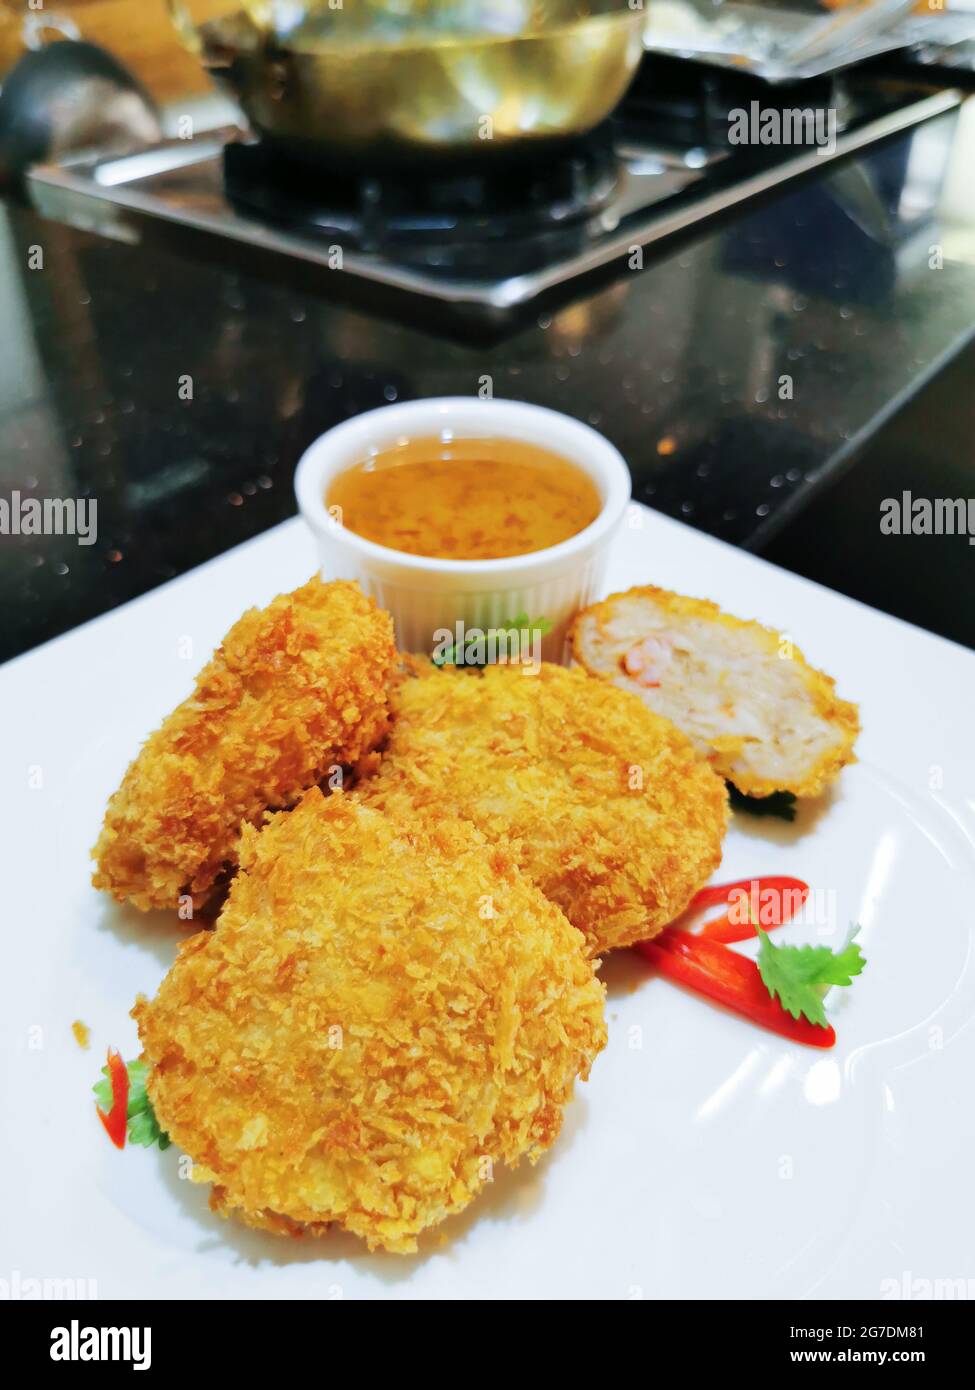 Deep fried prawn cake served on white ceramic plate with sweet and sour dipping sauce on small bowl on the plate, garnish with sliced red chili pepper Stock Photo